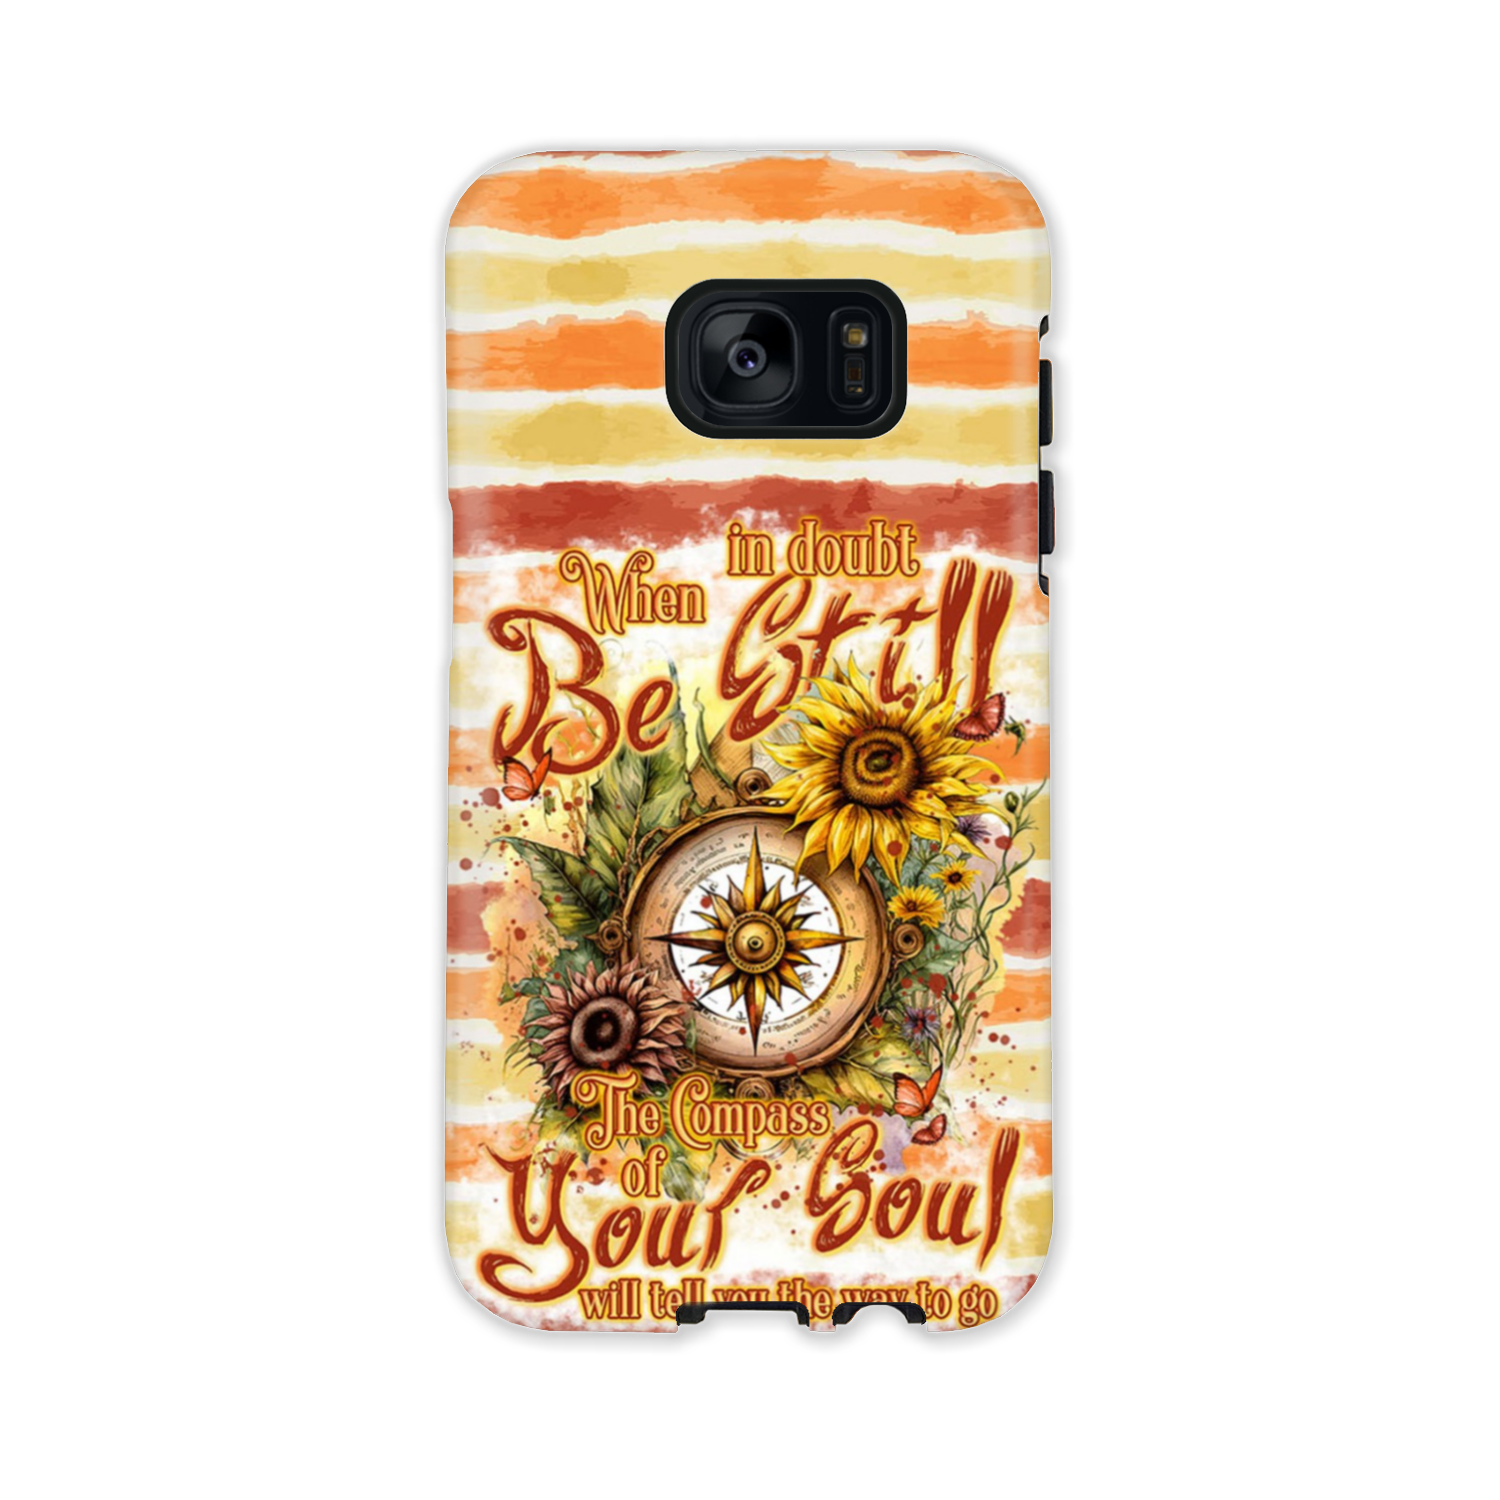 COMPASS OF YOUR SOUL PHONE CASE - TYTM2704231